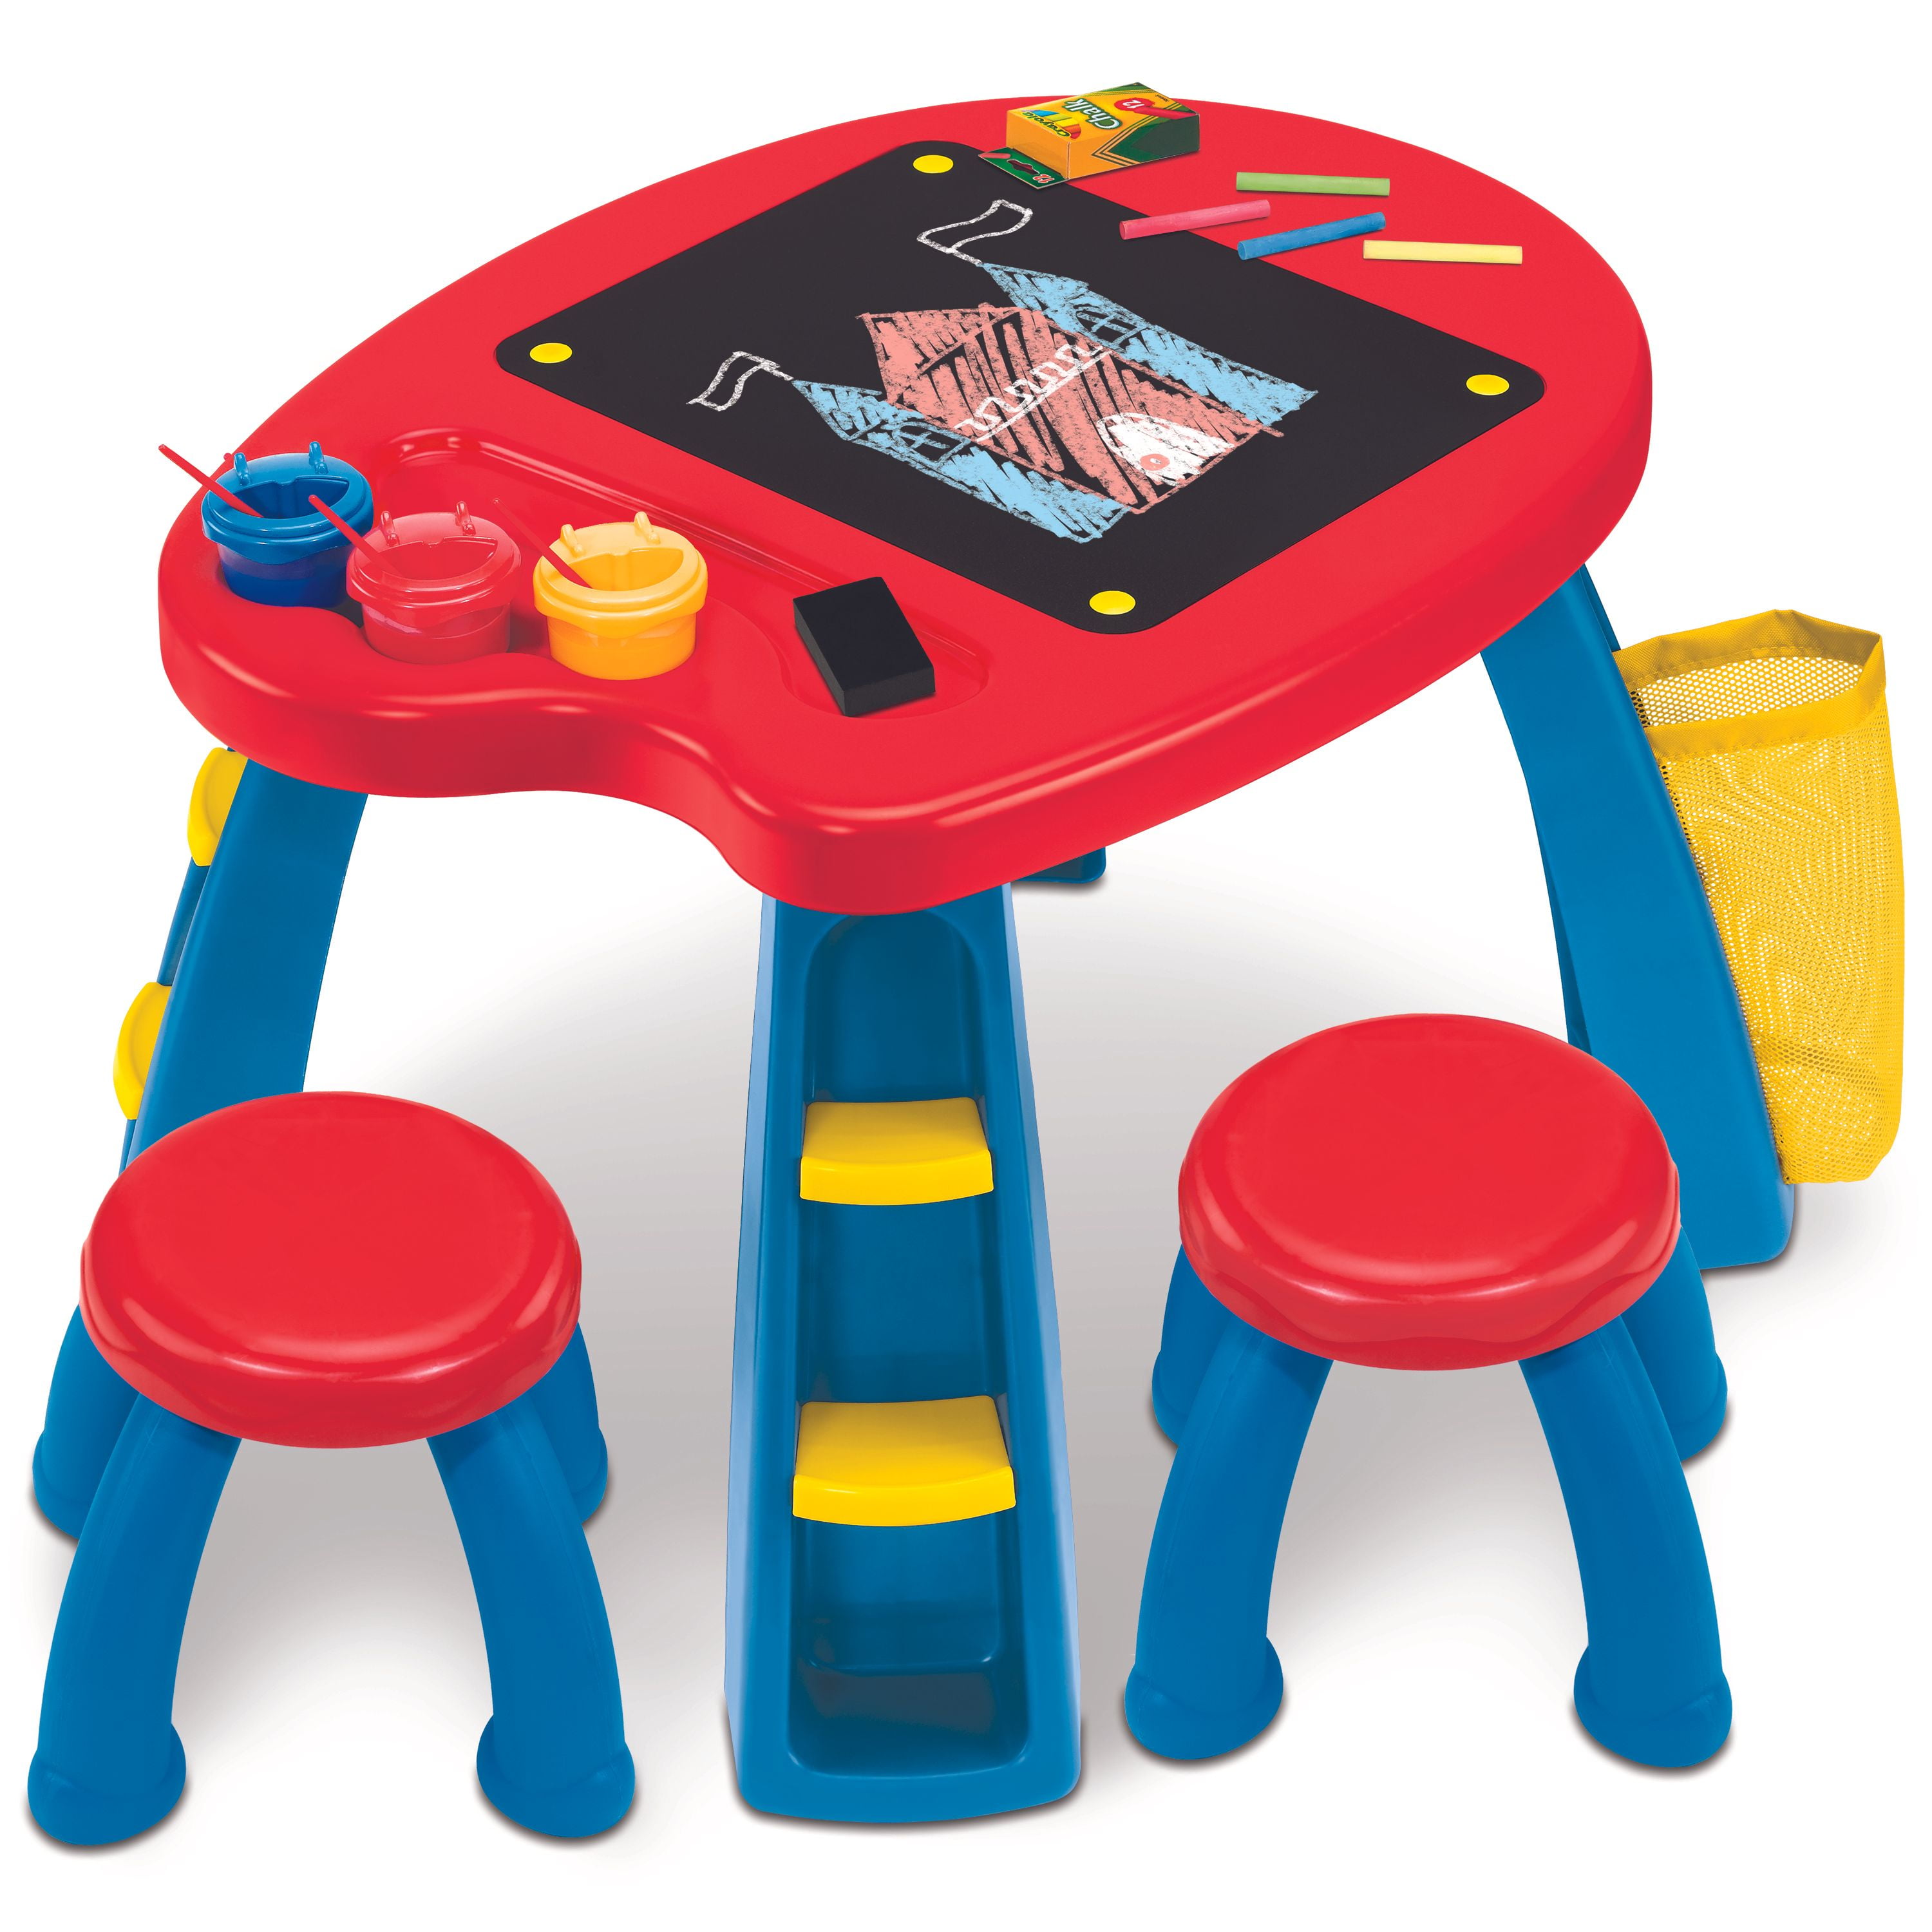 Details about   VTech Explore and Write Activity Desk Transforms into Easel and Chalkboard NEW 